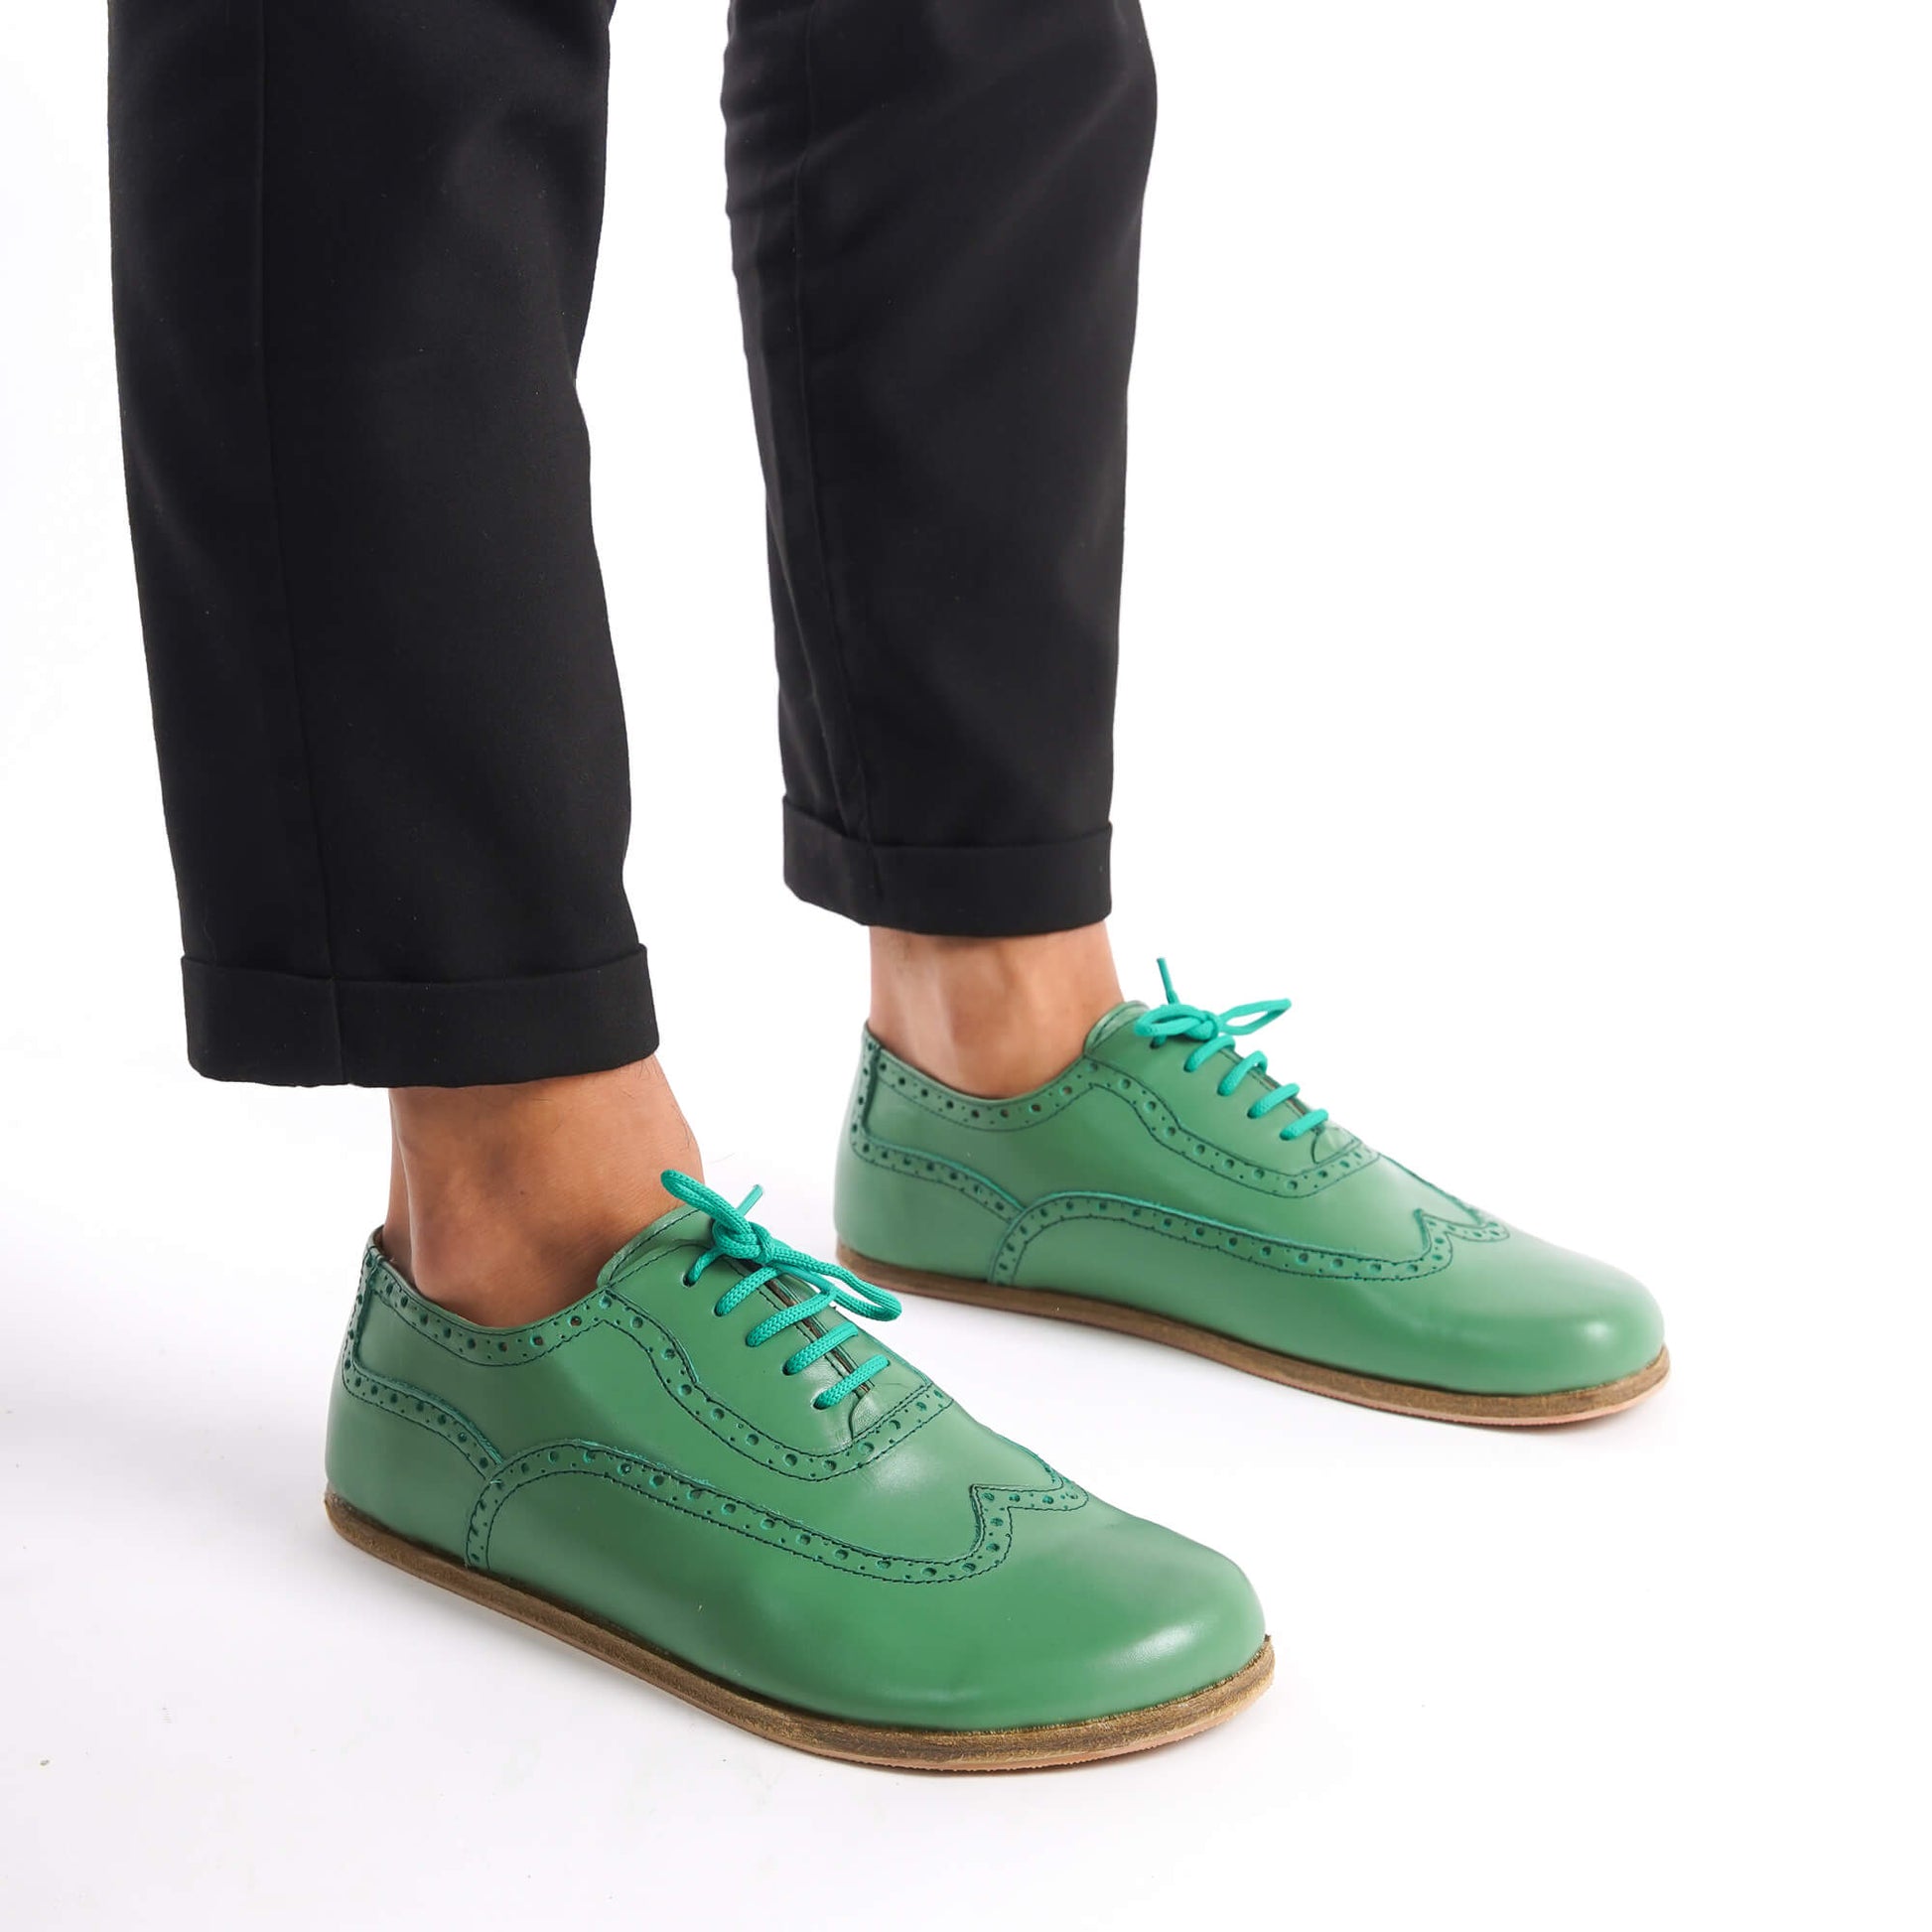 Stylish green Doris barefoot Oxfords paired with beige pants – versatile, modern, and comfortable footwear.